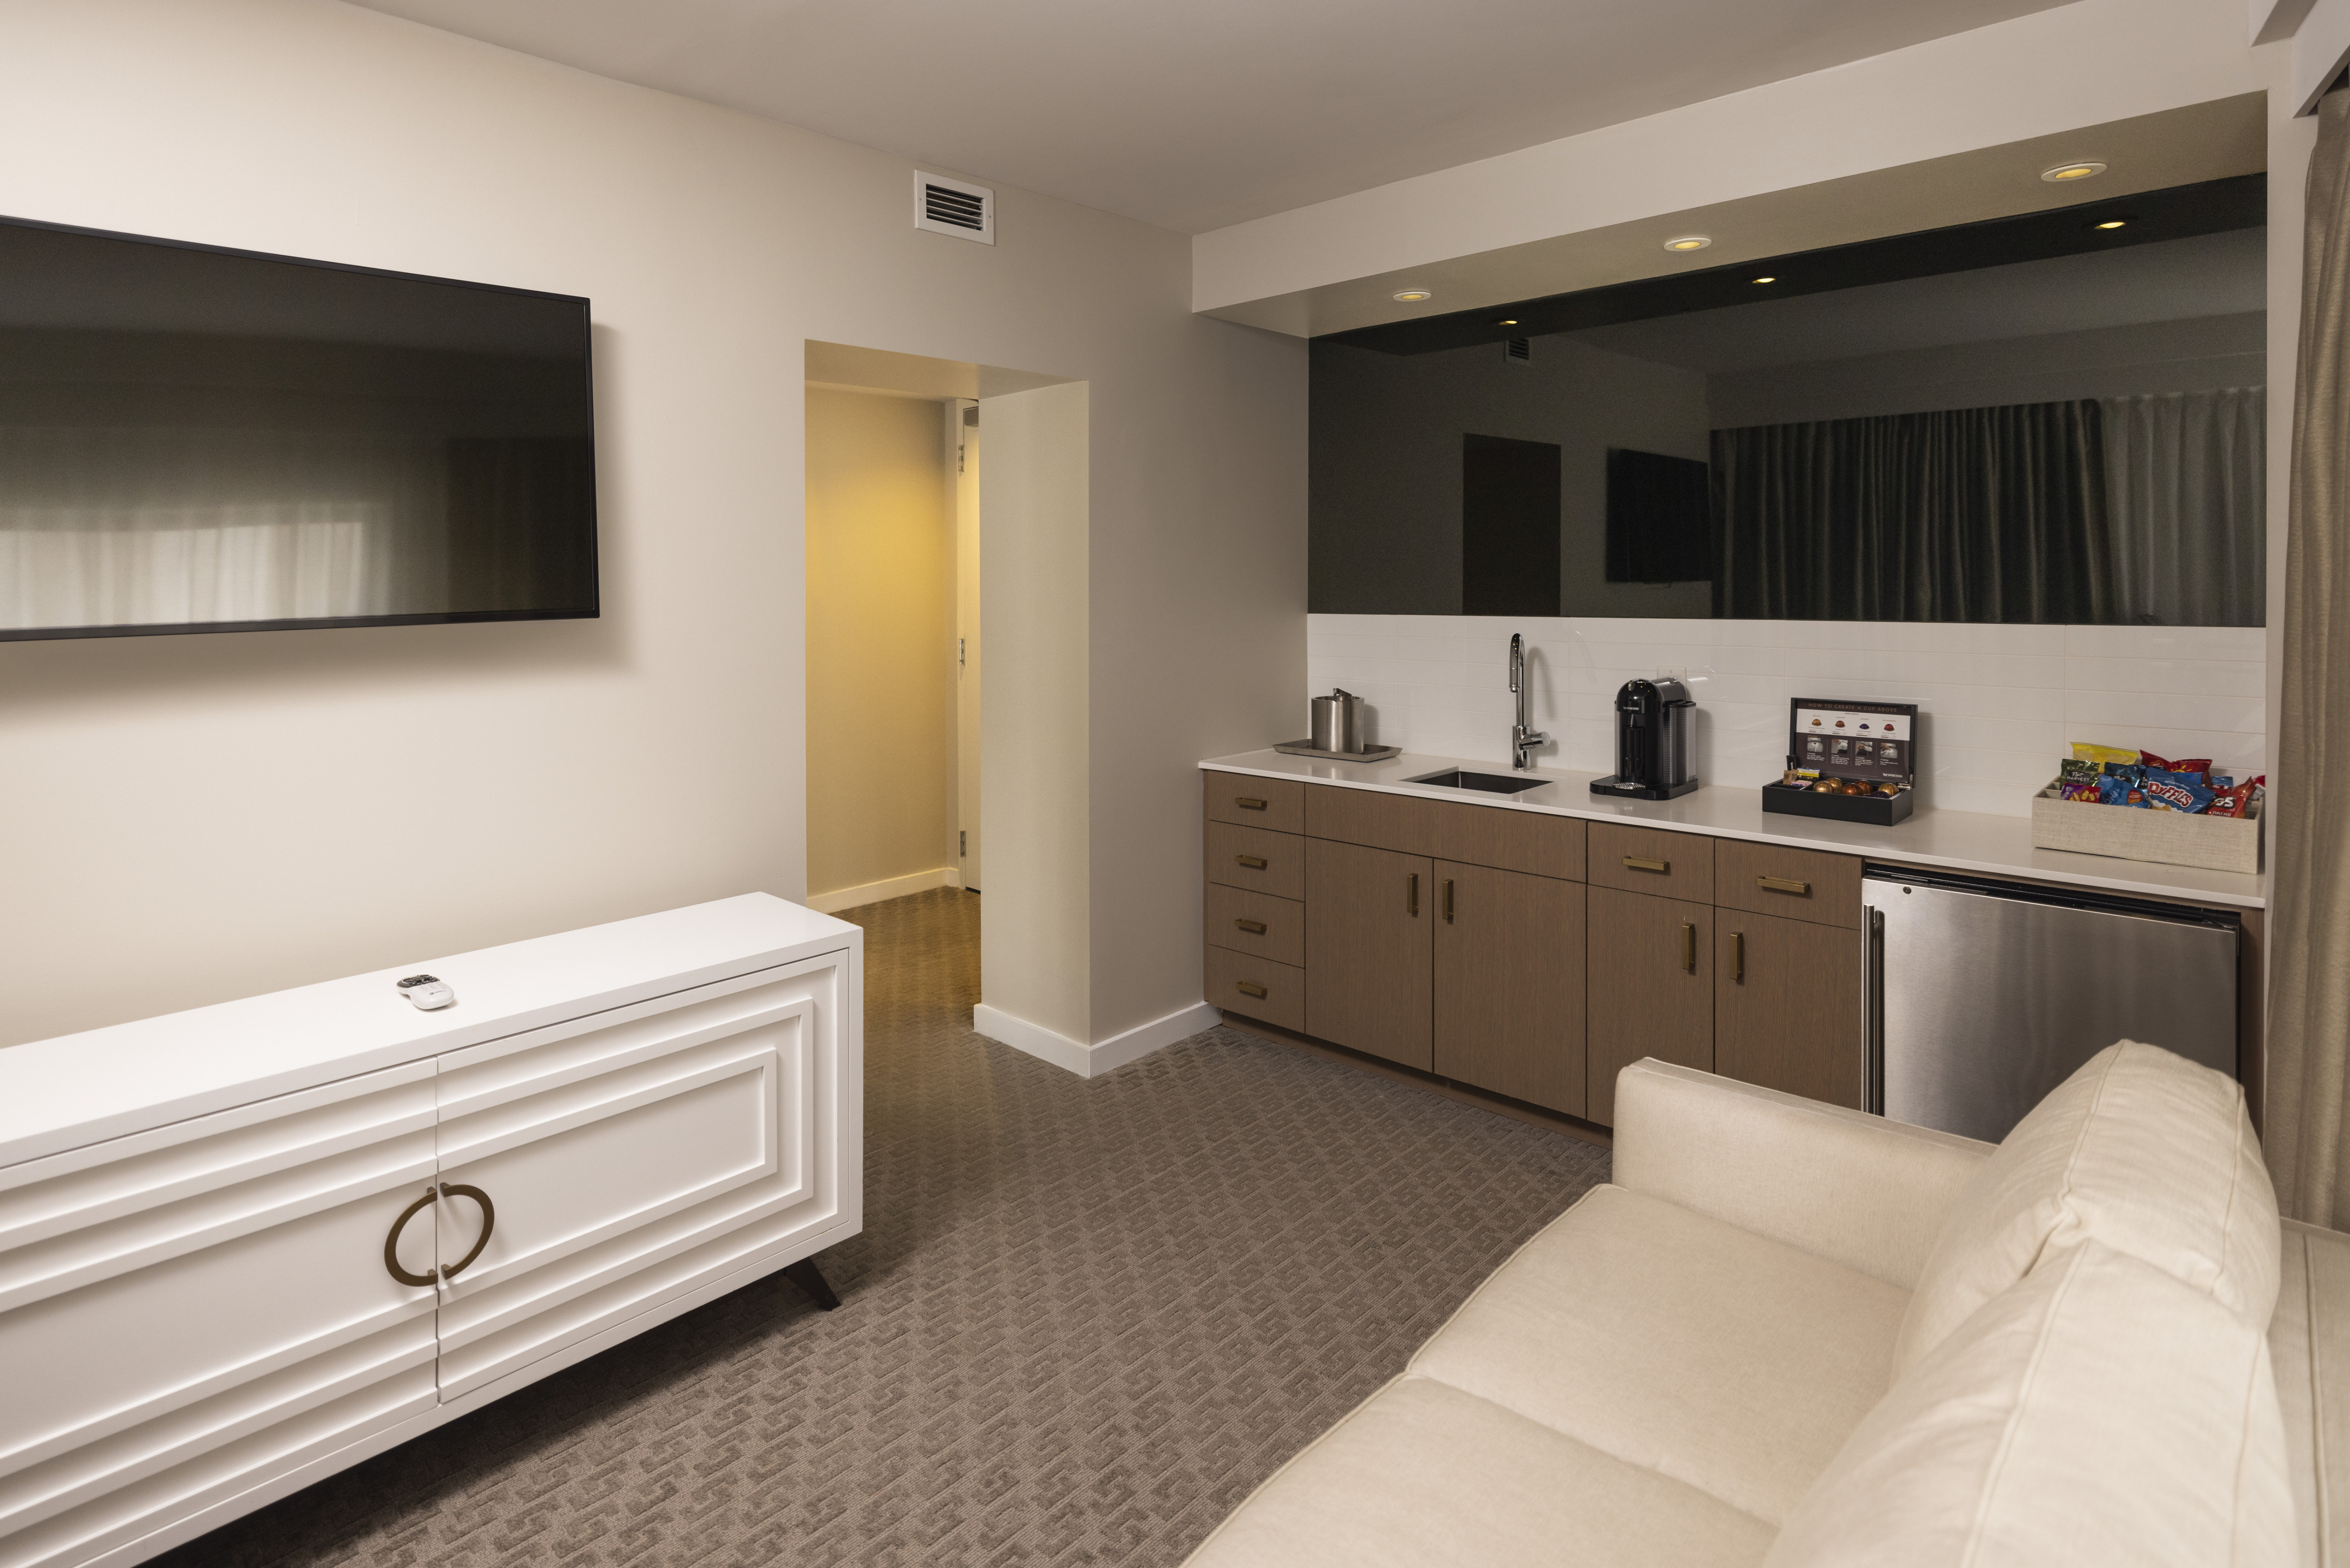 Living Area and Wet Bar in Hotel Room